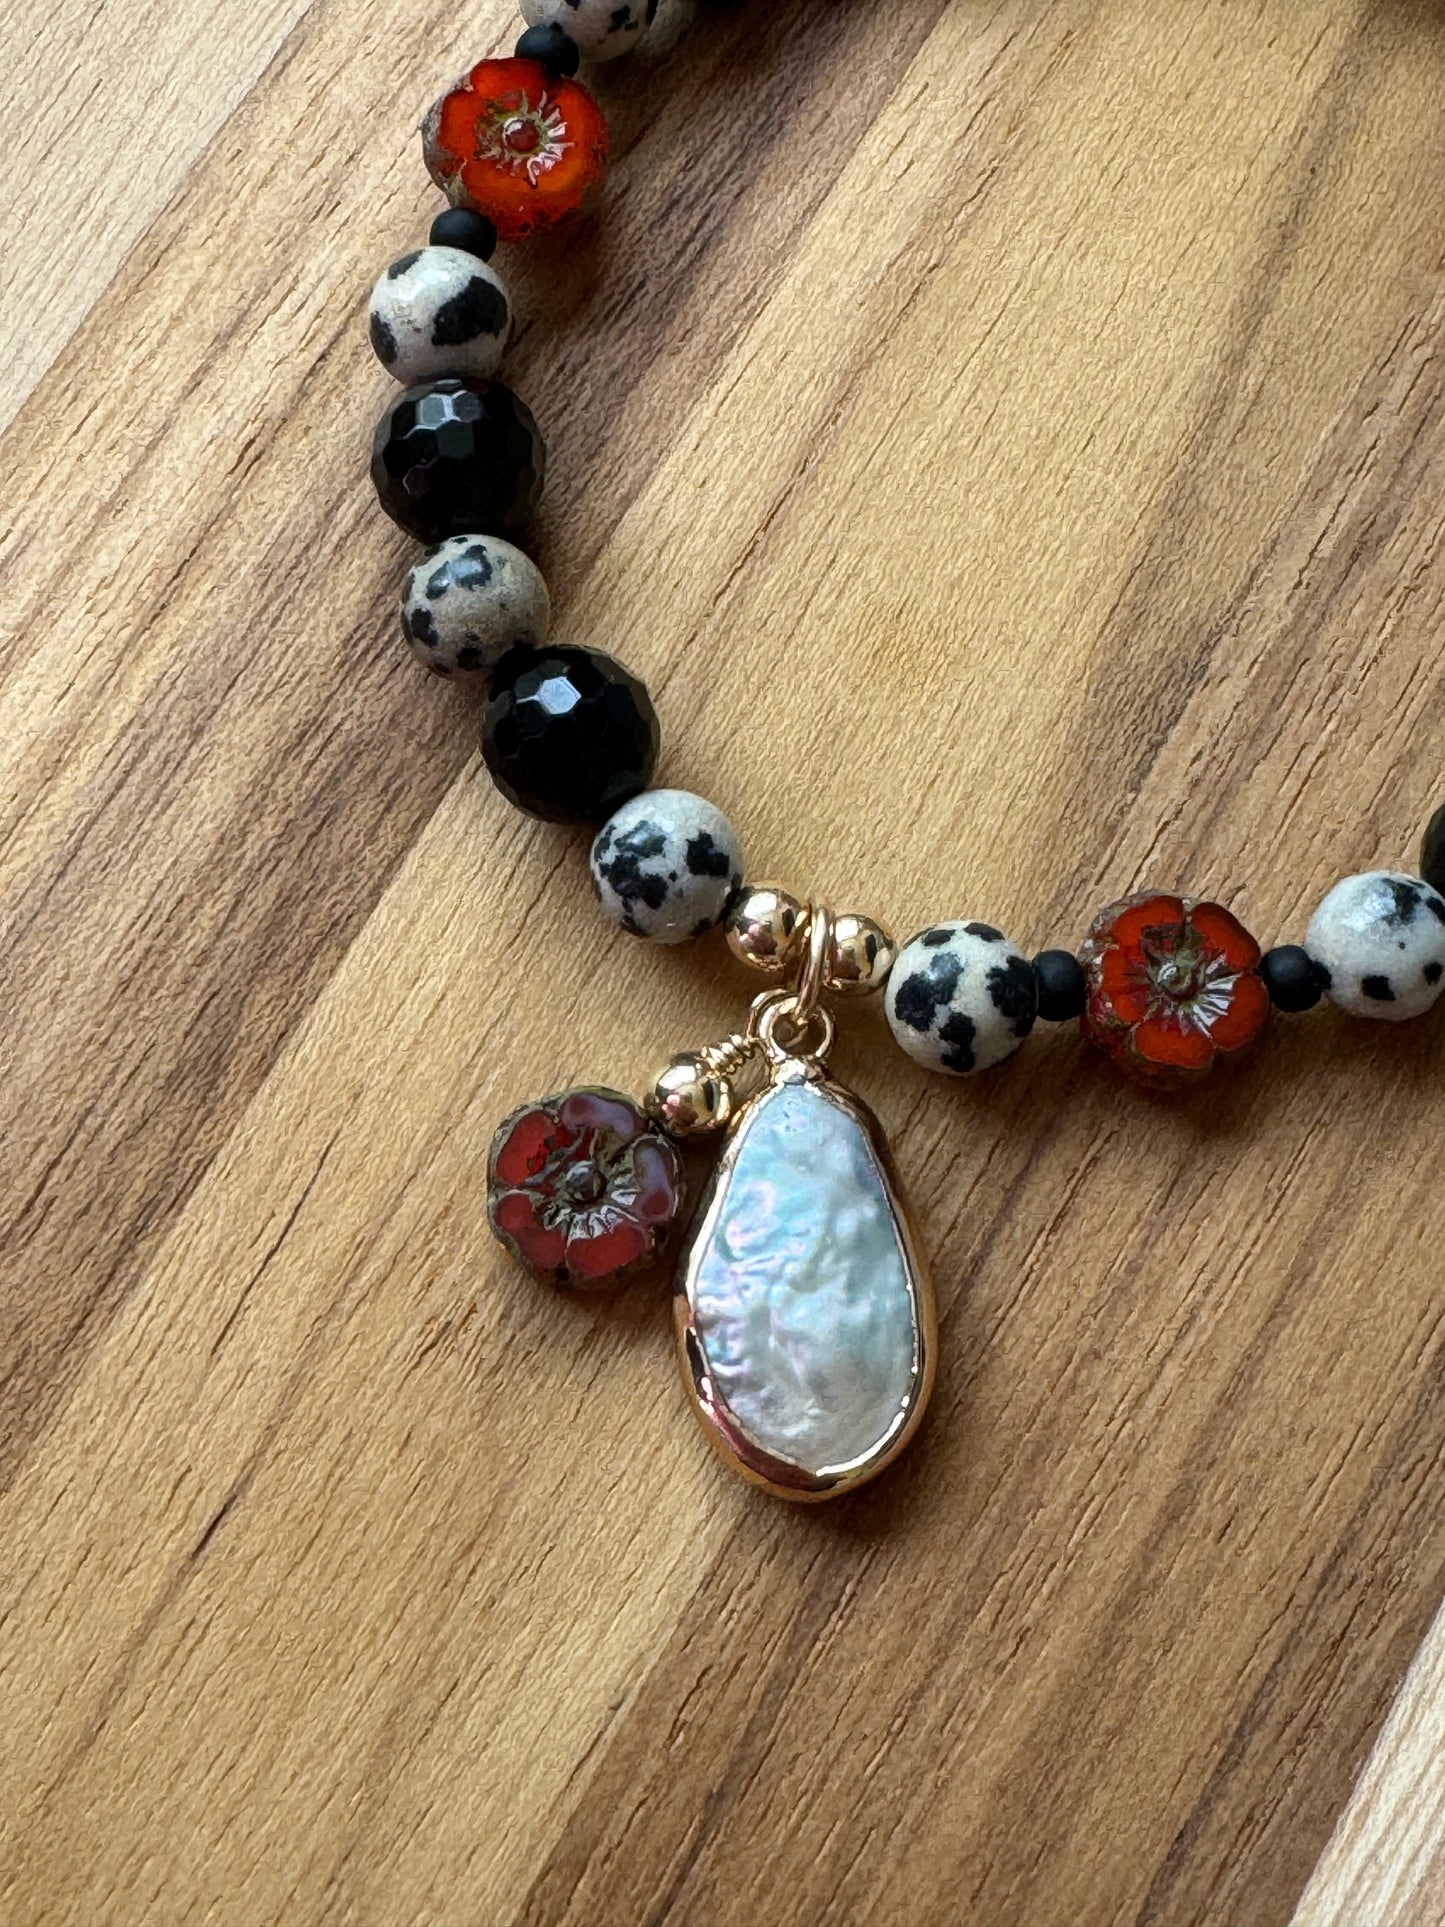 Dalmatian Jasper and Black Onyx Stretch Beaded Bracelet with Baroque Pearl and Red Flower Dangles